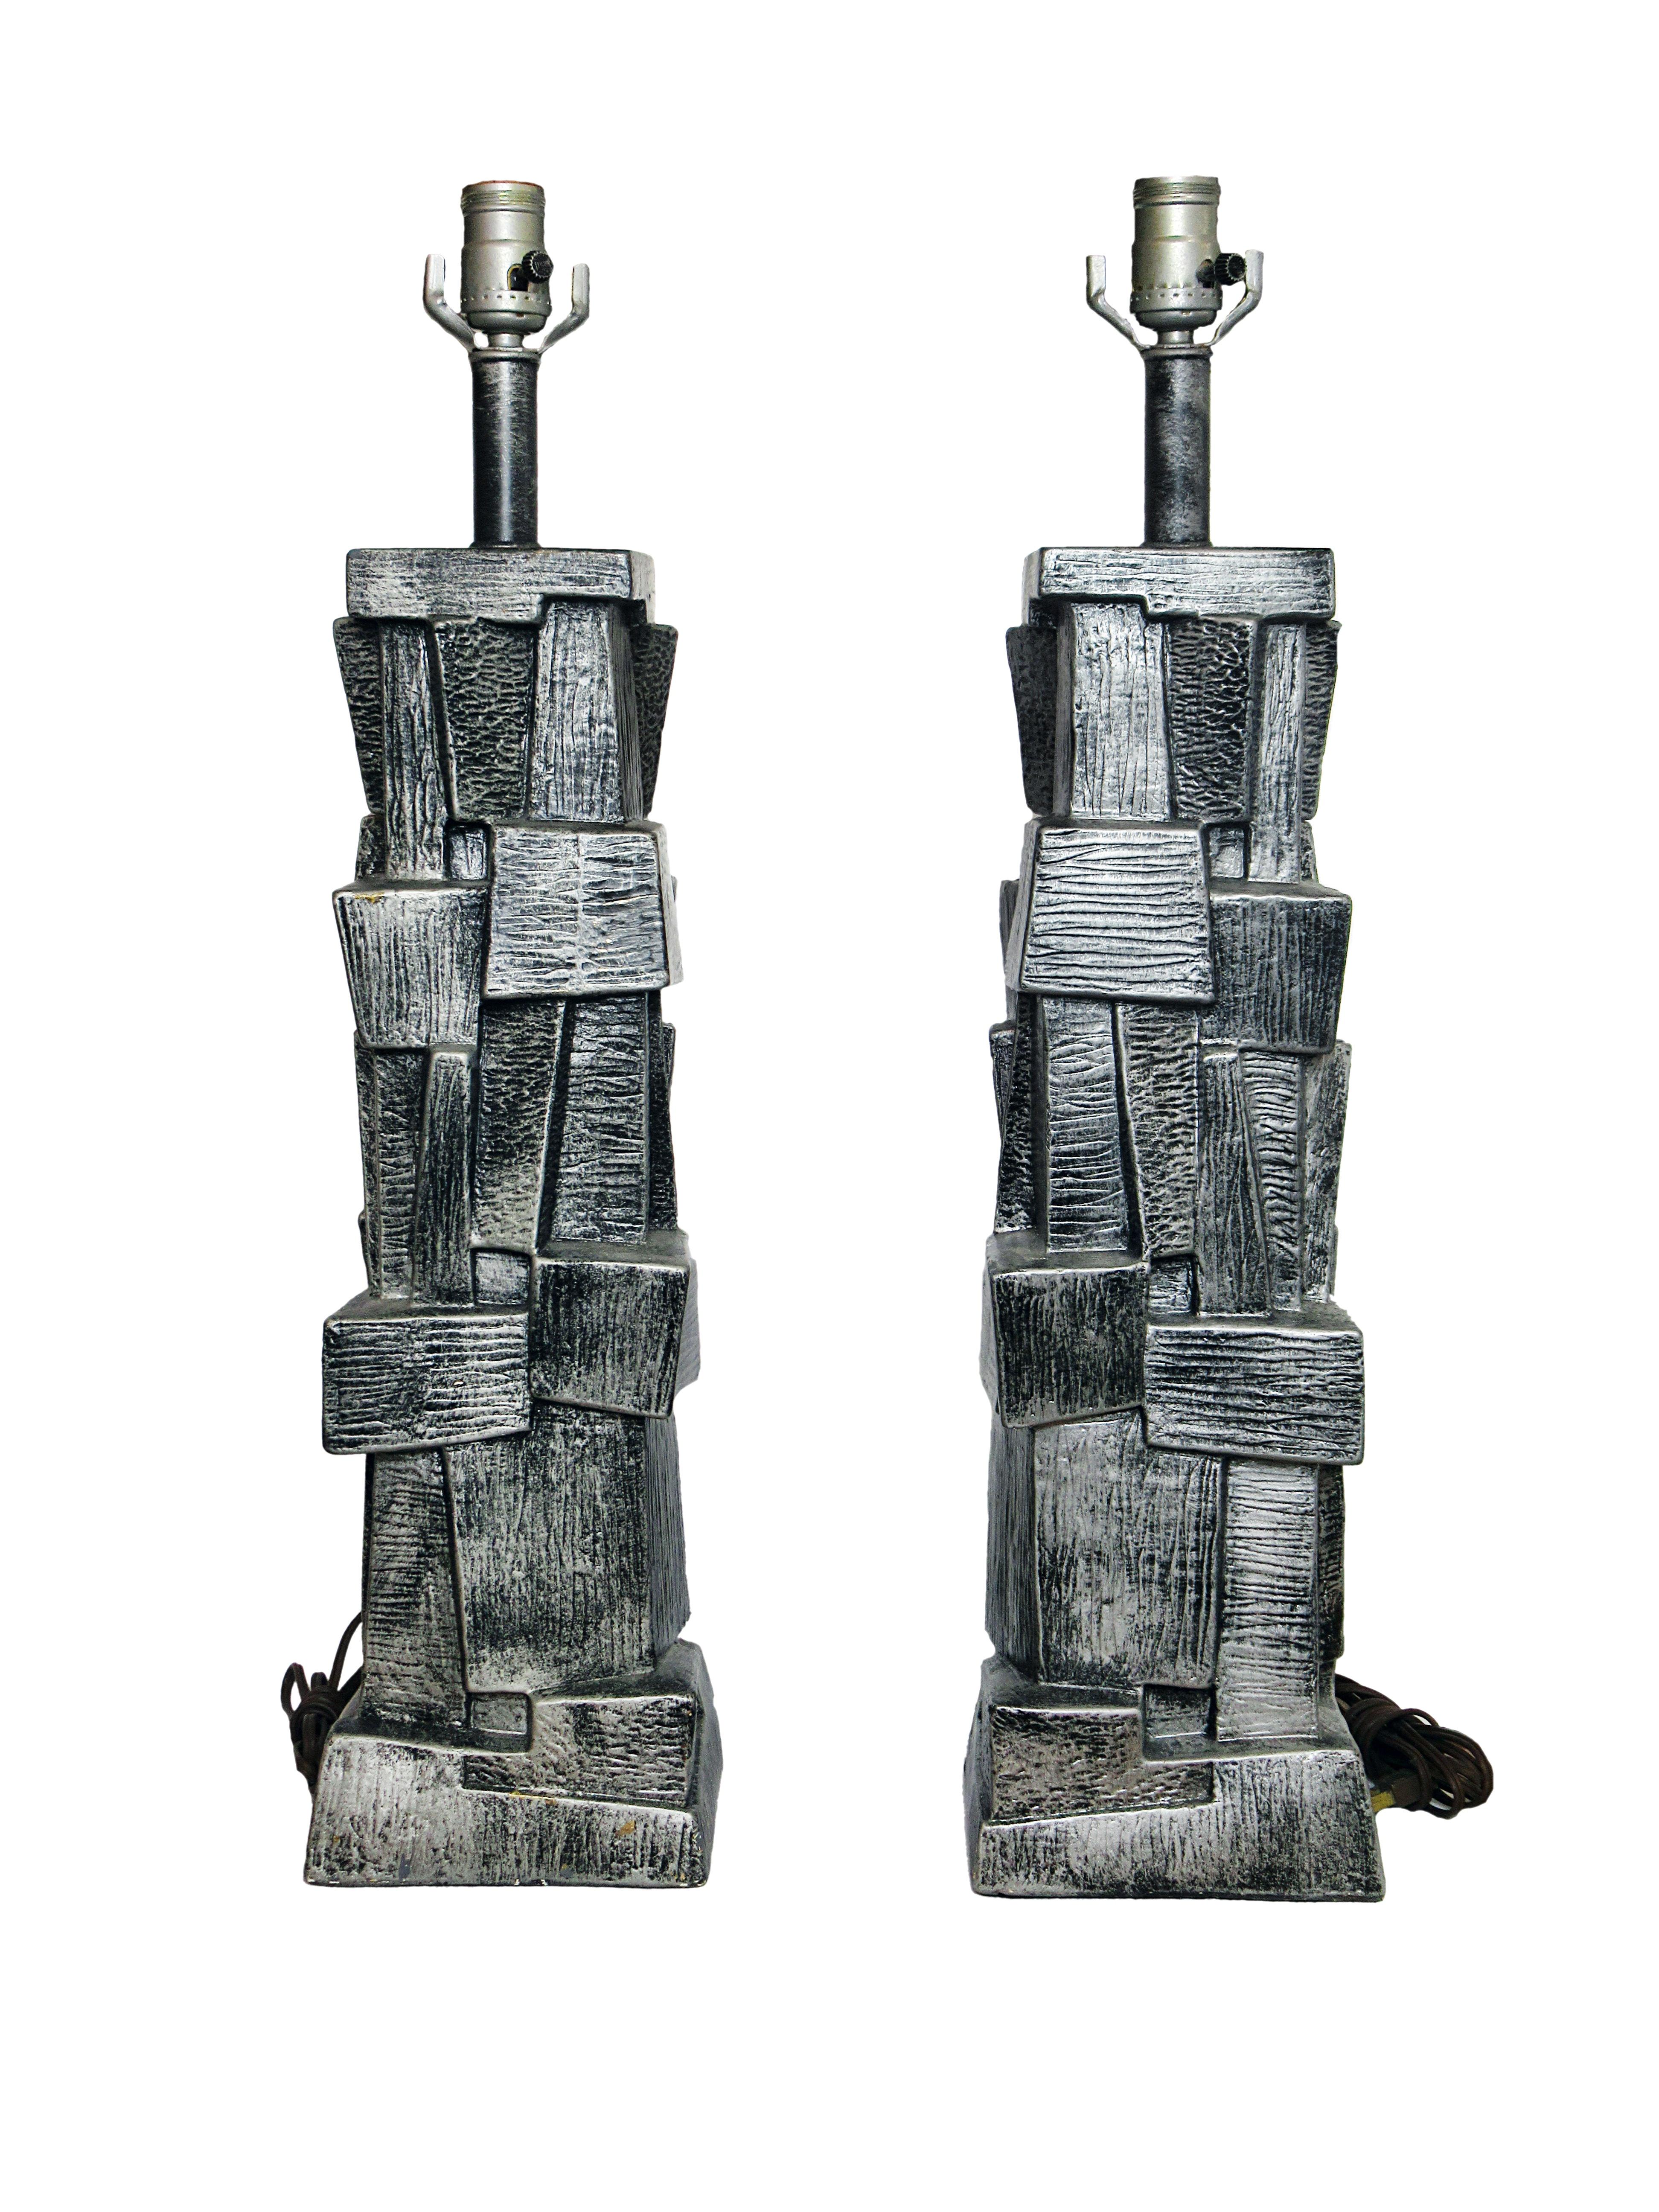 Pair of Brutalist table lamps, silver glazed ceramic.